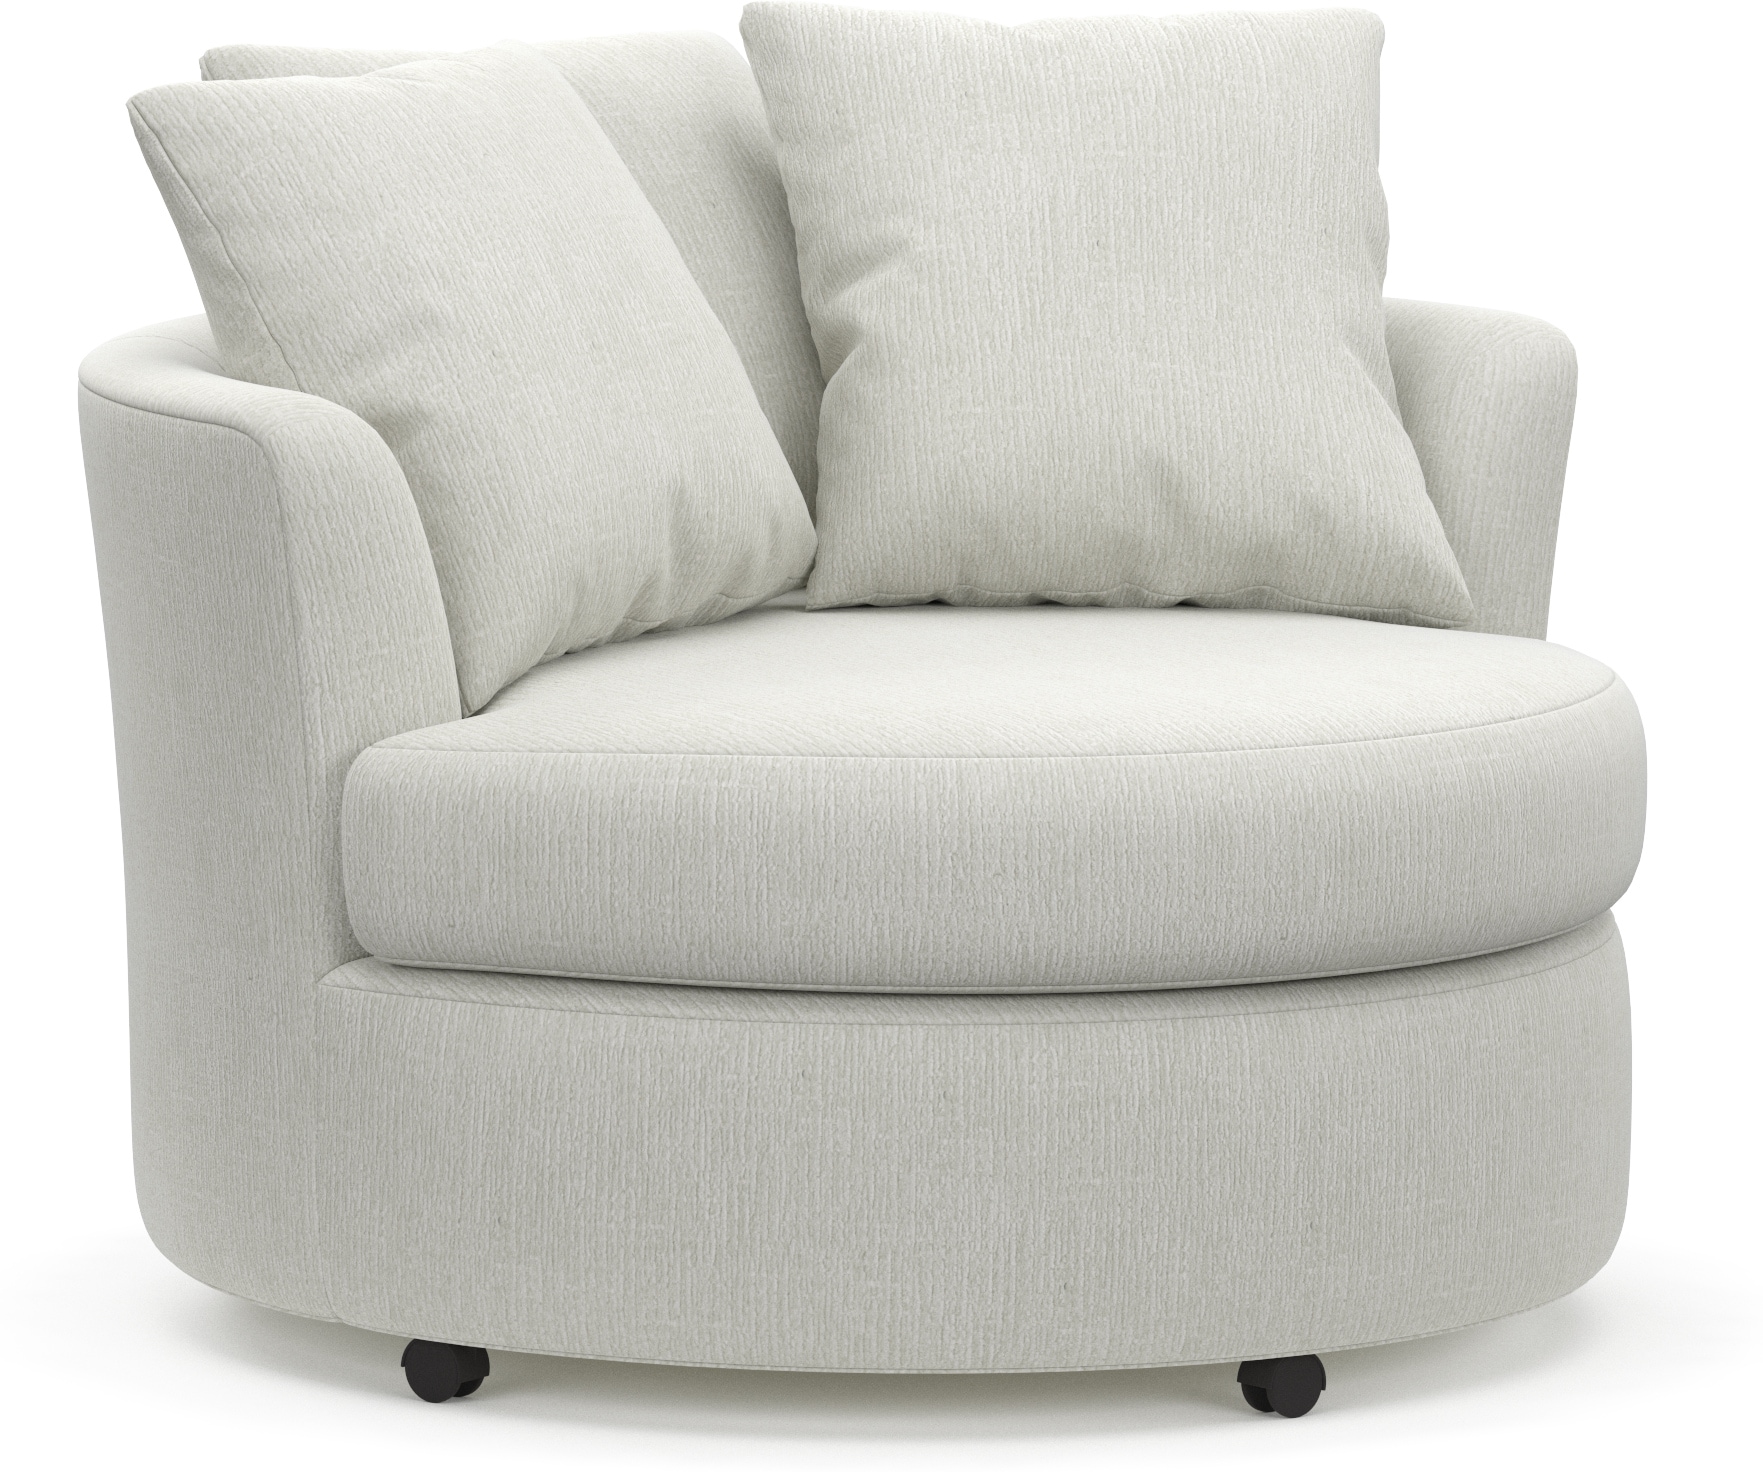 Tweed Swivel Chair Gray Home Furniture, 56% OFF